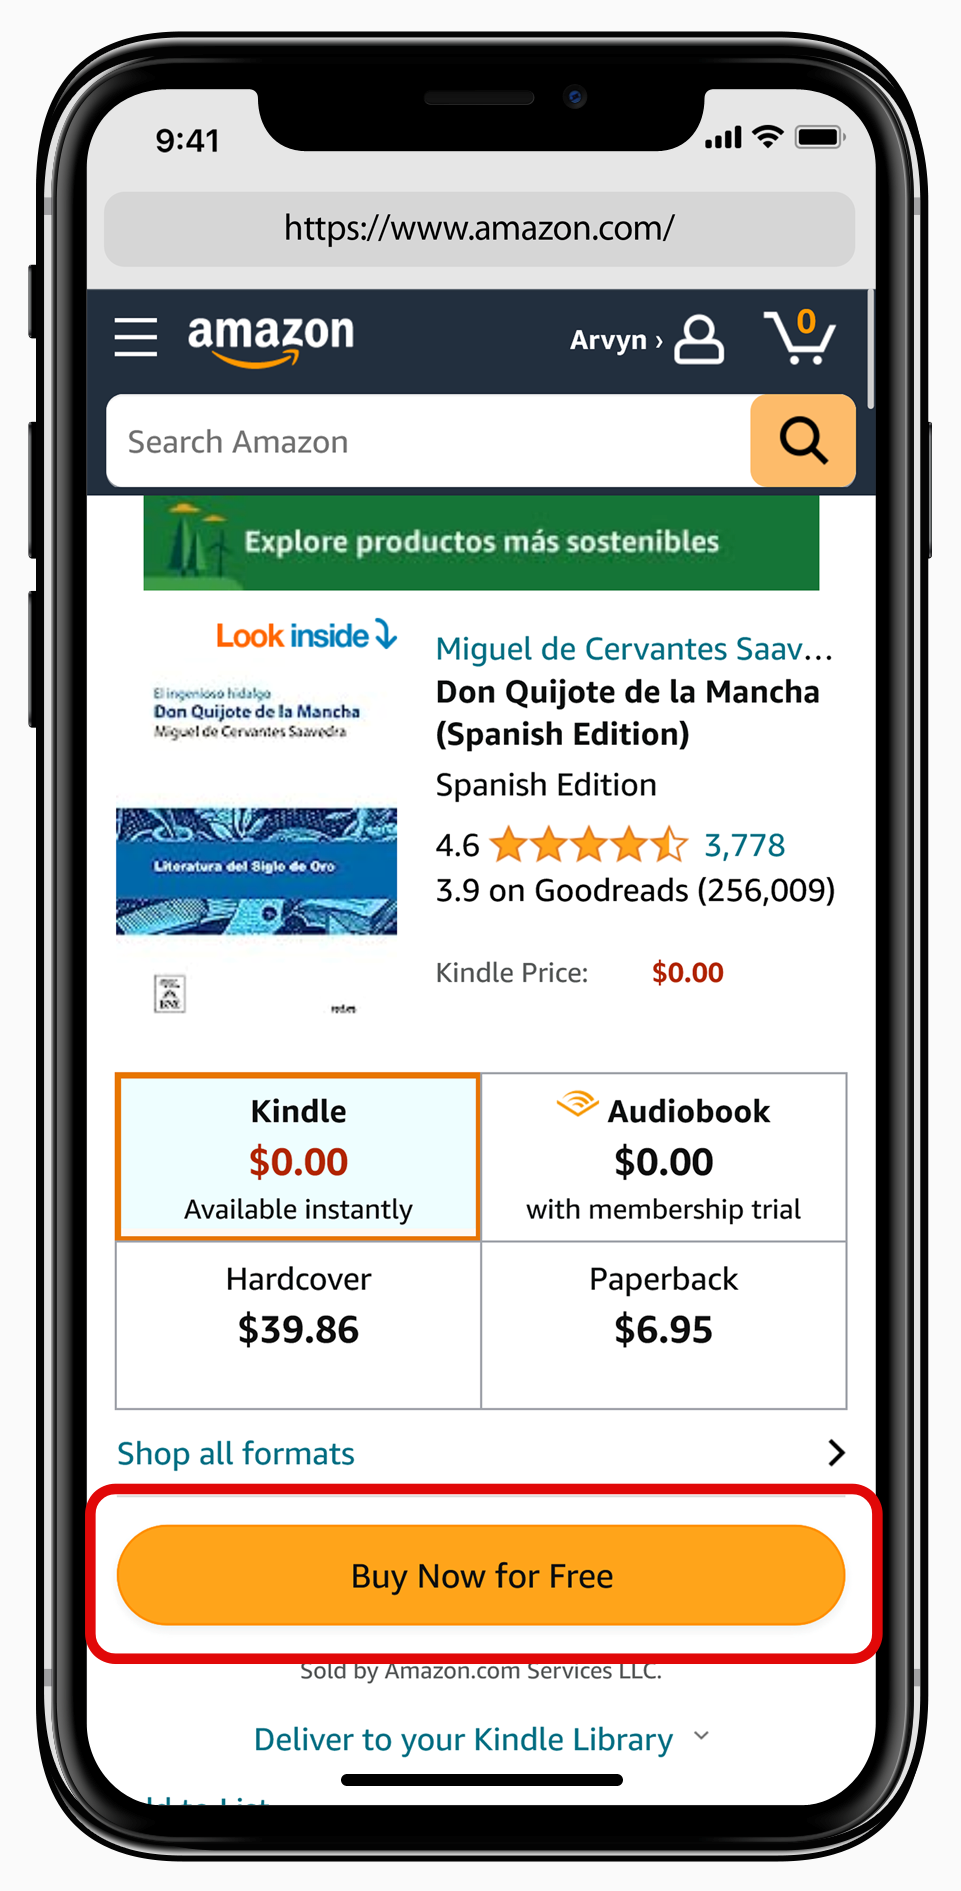 Amazon Kindle Store Product Listing for Don Quijote in Spanish on an iPhone